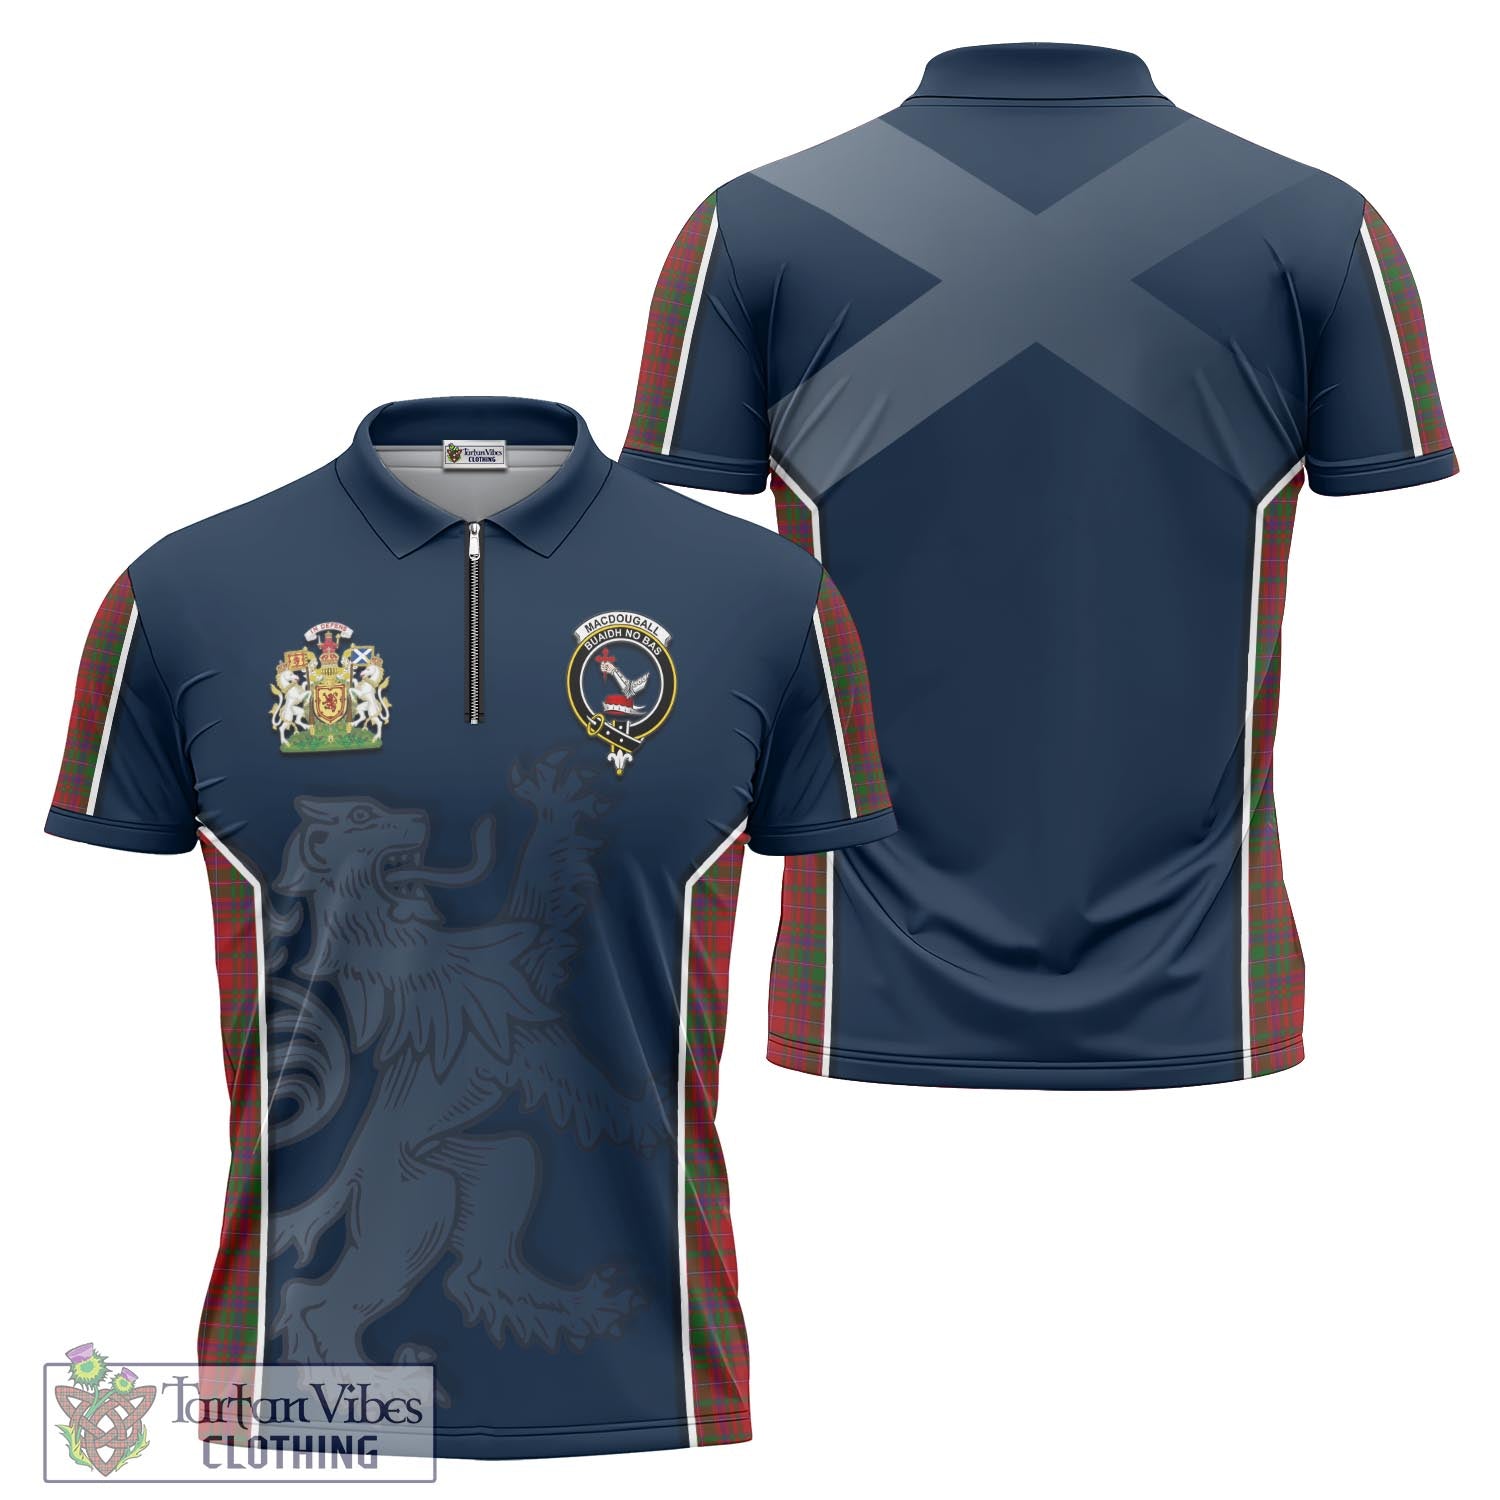 Tartan Vibes Clothing MacDougall Tartan Zipper Polo Shirt with Family Crest and Lion Rampant Vibes Sport Style